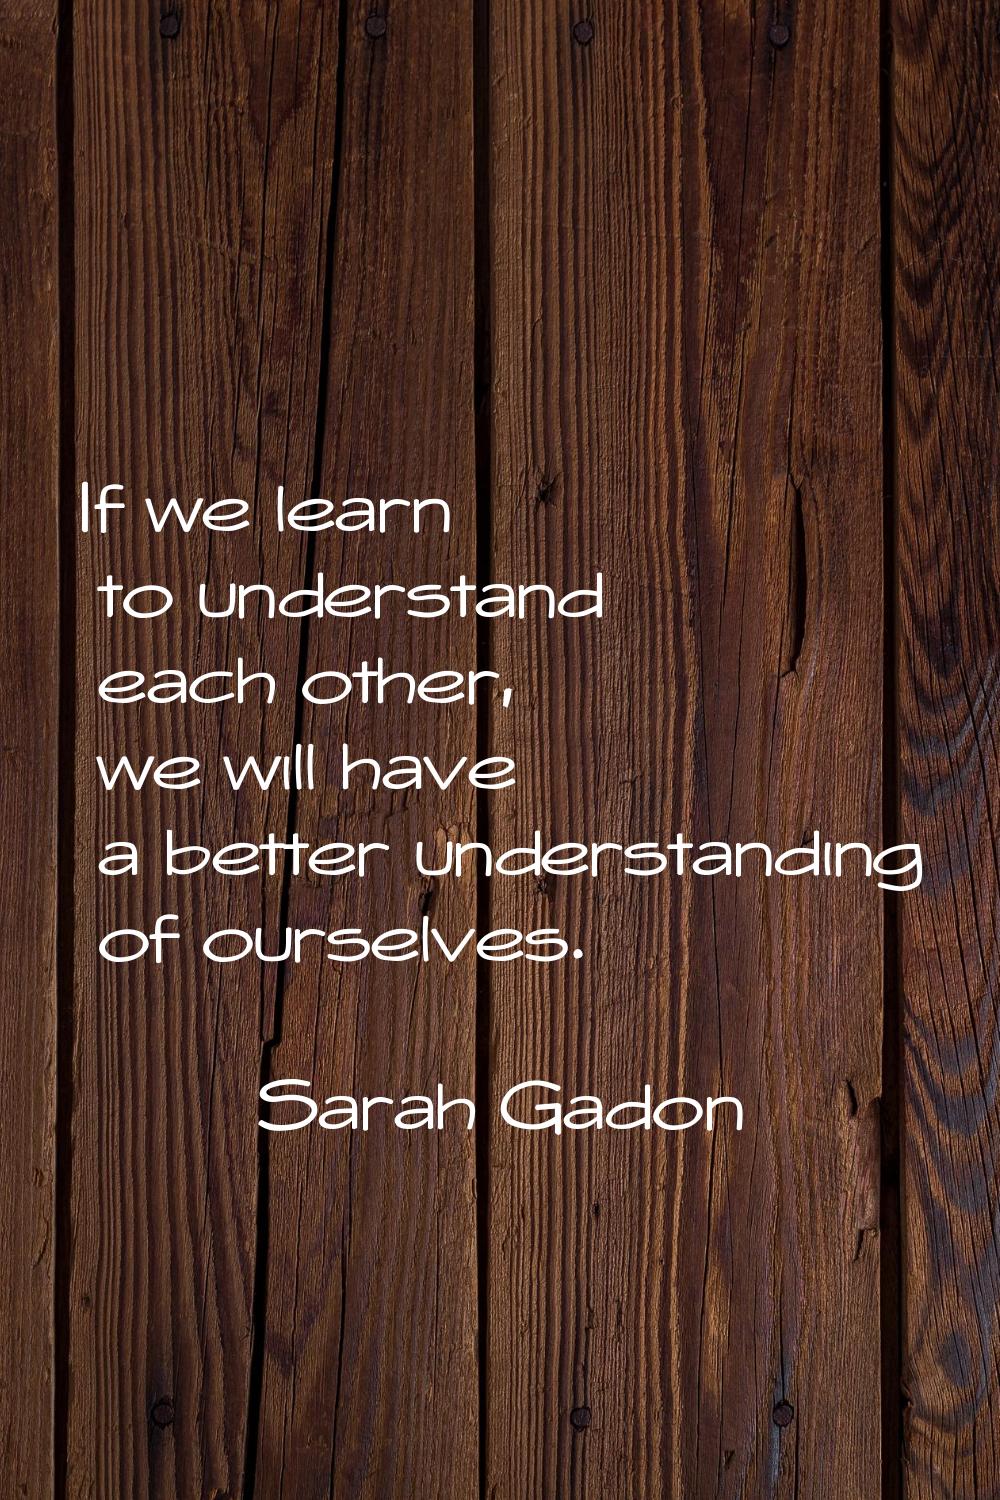 If we learn to understand each other, we will have a better understanding of ourselves.